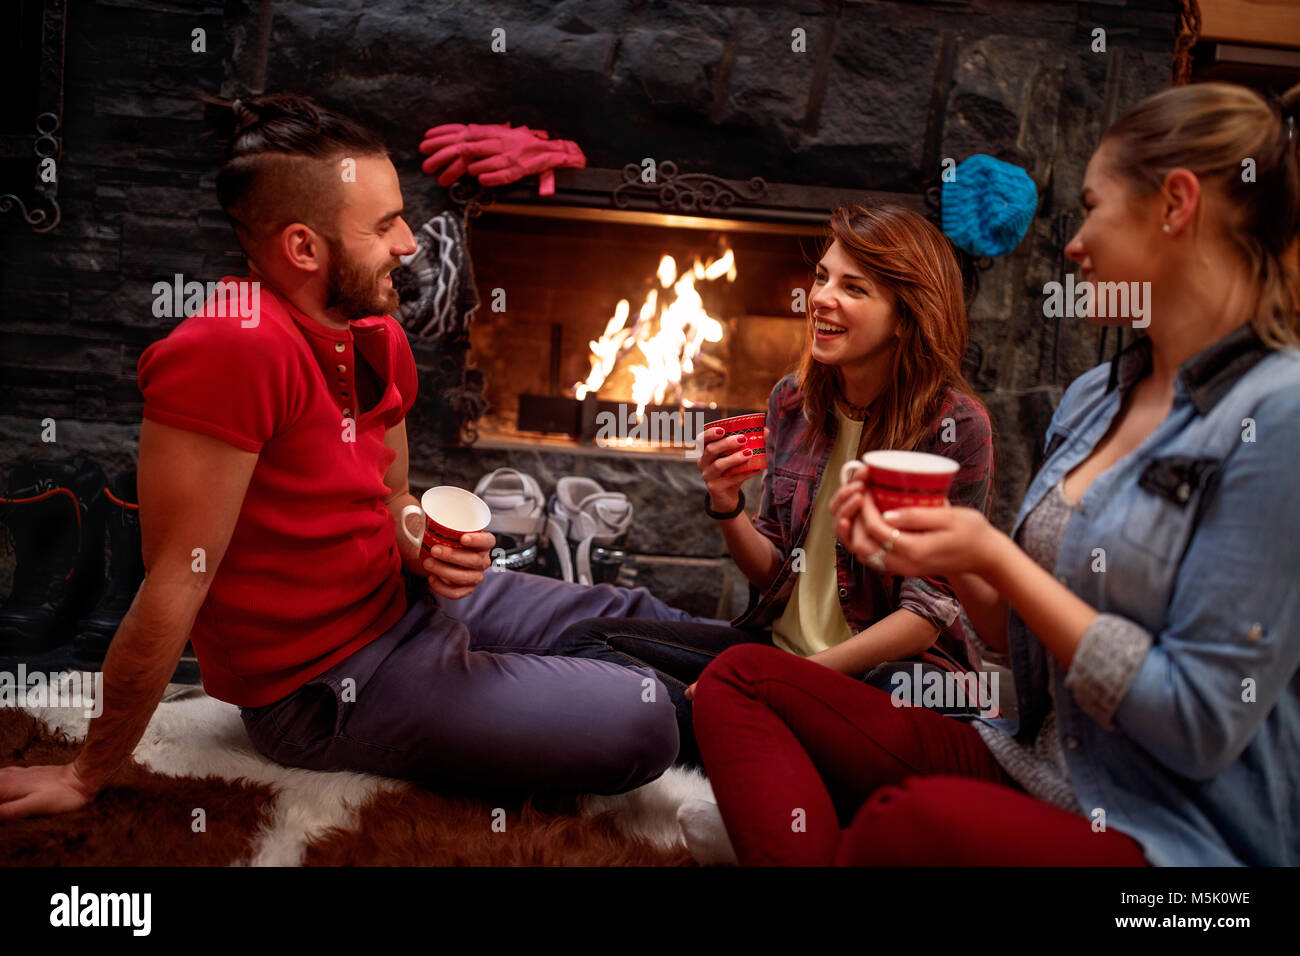 friend's relaxation after skiing in front of fireplace at home Stock Photo